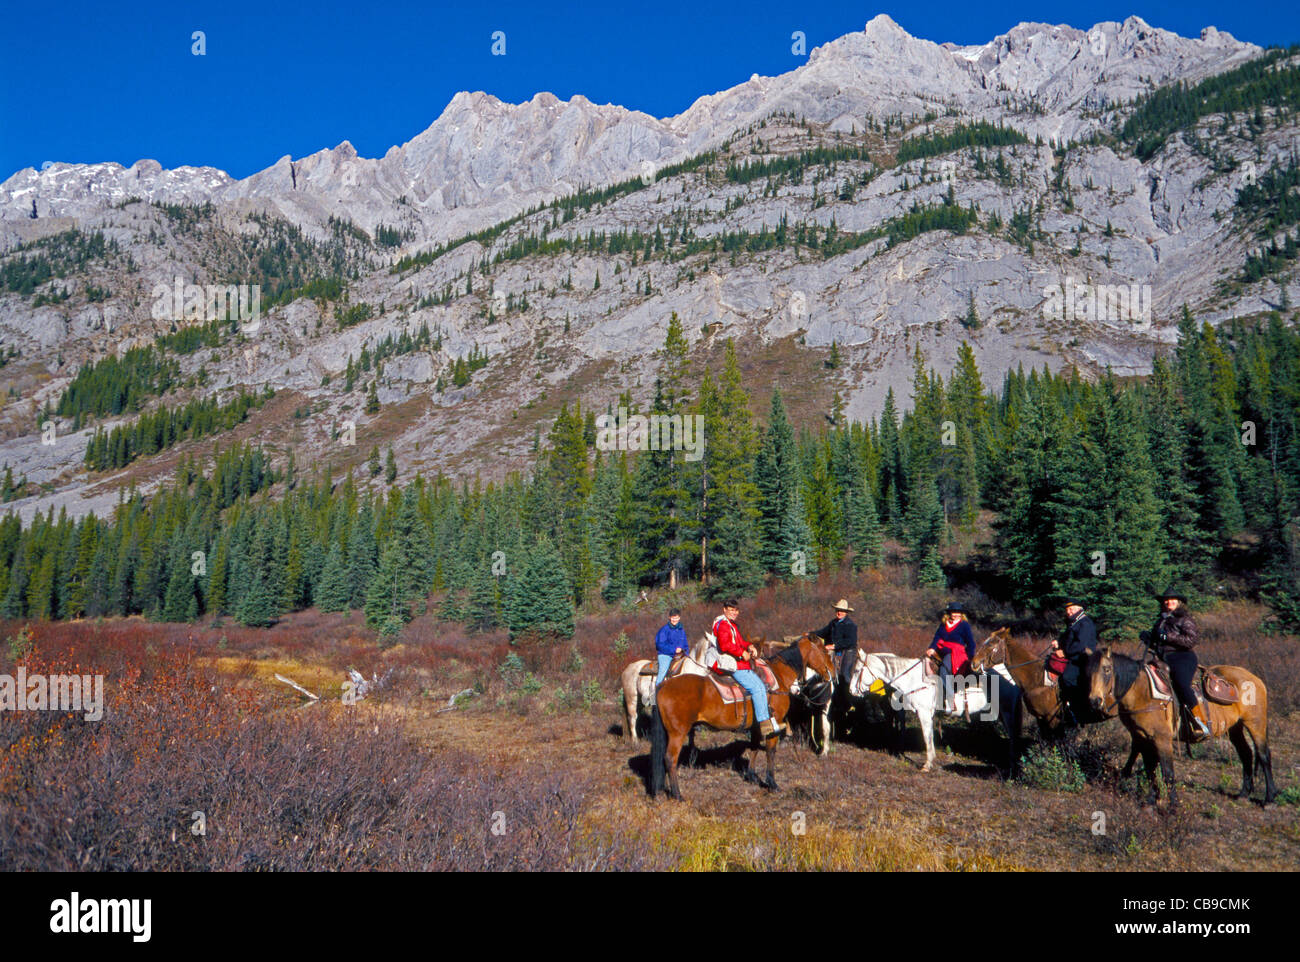 Horseback riders on a vacation trip pause during their trail ride in Banff National Park in the Canadian Rockies in Alberta, Canada, North America. Stock Photo